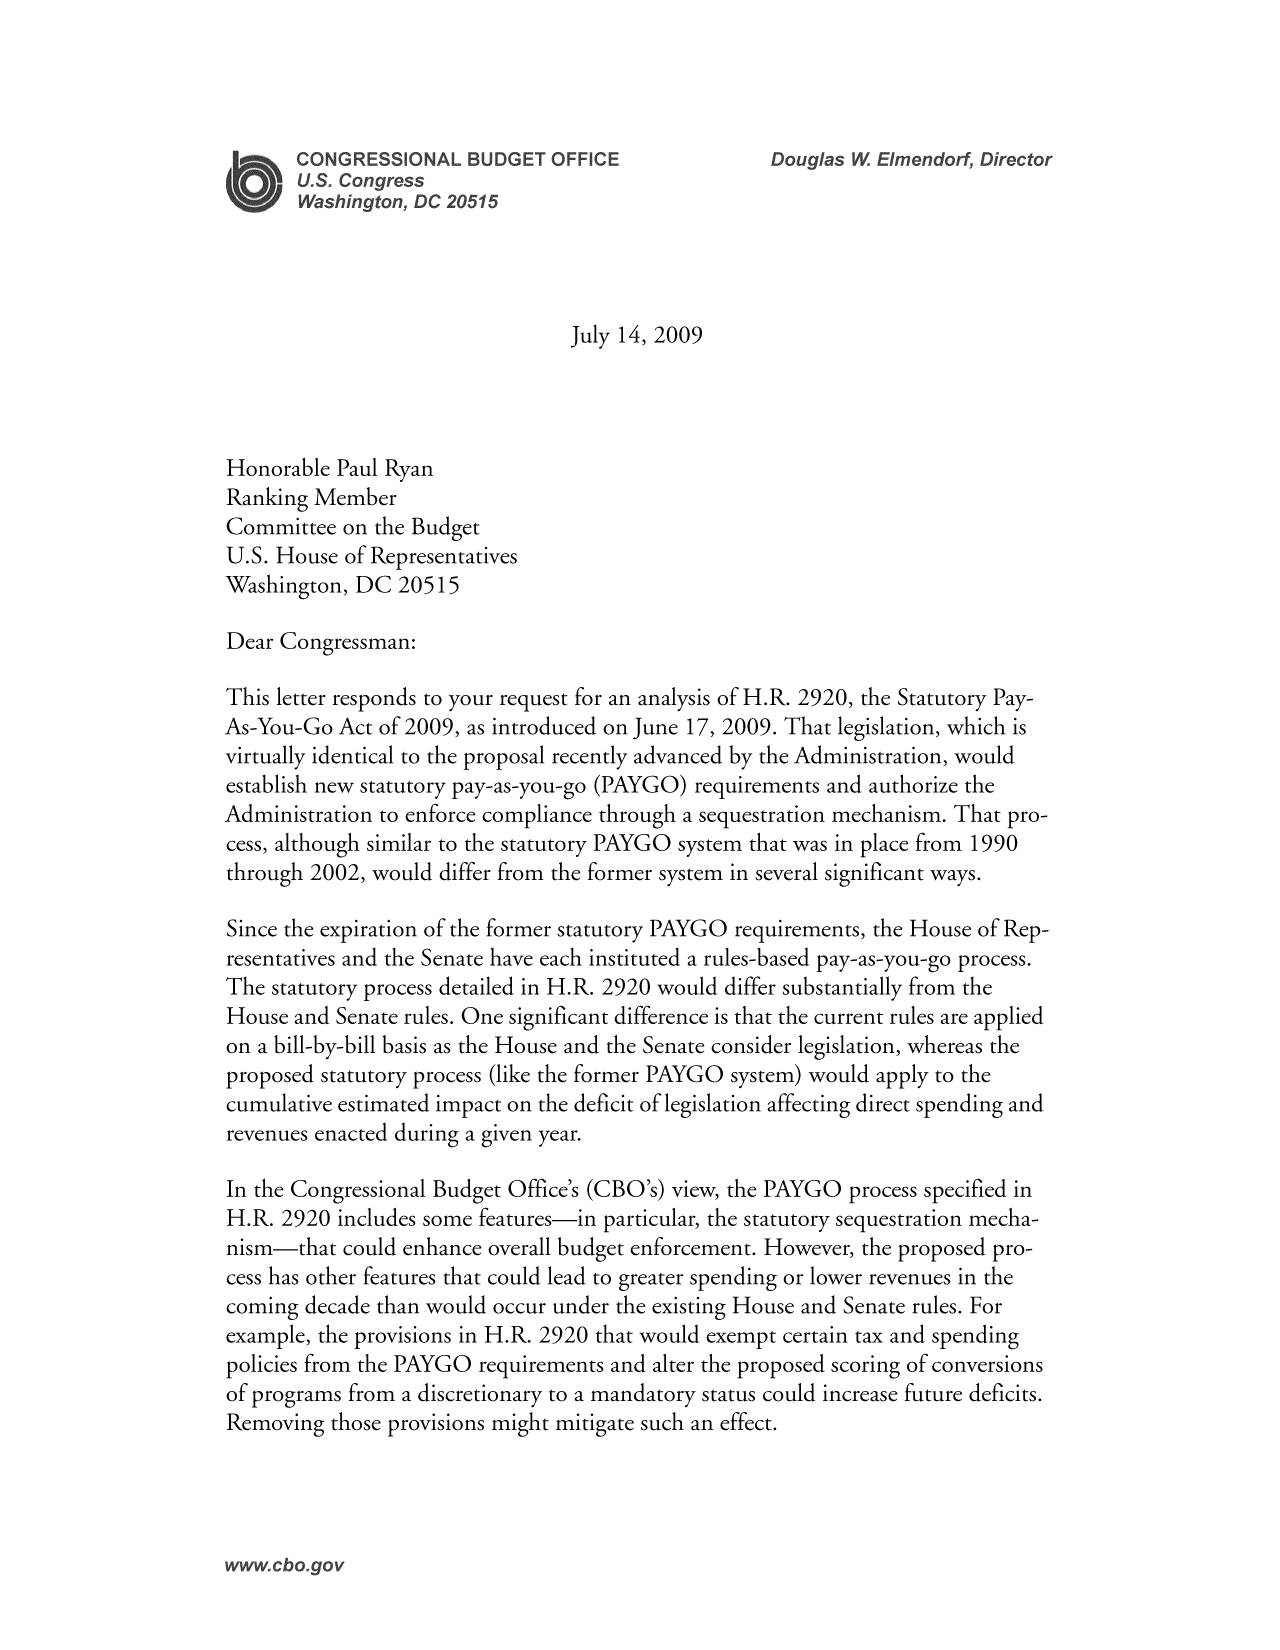 handle is hein.congrec/cbo8348 and id is 1 raw text is: July 14, 2009

Honorable Paul Ryan
Ranking Member
Committee on the Budget
U.S. House of Representatives
Washington, DC 20515
Dear Congressman:
This letter responds to your request for an analysis of H.R. 2920, the Statutory Pay-
As-You-Go Act of 2009, as introduced on June 17, 2009. That legislation, which is
virtually identical to the proposal recently advanced by the Administration, would
establish new statutory pay-as-you-go (PAYGO) requirements and authorize the
Administration to enforce compliance through a sequestration mechanism. That pro-
cess, although similar to the statutory PAYGO system that was in place from 1990
through 2002, would differ from the former system in several significant ways.
Since the expiration of the former statutory PAYGO requirements, the House of Rep-
resentatives and the Senate have each instituted a rules-based pay-as-you-go process.
The statutory process detailed in H.R. 2920 would differ substantially from the
House and Senate rules. One significant difference is that the current rules are applied
on a bill-by-bill basis as the House and the Senate consider legislation, whereas the
proposed statutory process (like the former PAYGO system) would apply to the
cumulative estimated impact on the deficit of legislation affecting direct spending and
revenues enacted during a given year.
In the Congressional Budget Office's (CBO's) view, the PAYGO process specified in
H.R. 2920 includes some features-in particular, the statutory sequestration mecha-
nism-that could enhance overall budget enforcement. However, the proposed pro-
cess has other features that could lead to greater spending or lower revenues in the
coming decade than would occur under the existing House and Senate rules. For
example, the provisions in H.R. 2920 that would exempt certain tax and spending
policies from the PAYGO requirements and alter the proposed scoring of conversions
of programs from a discretionary to a mandatory status could increase future deficits.
Removing those provisions might mitigate such an effect.


